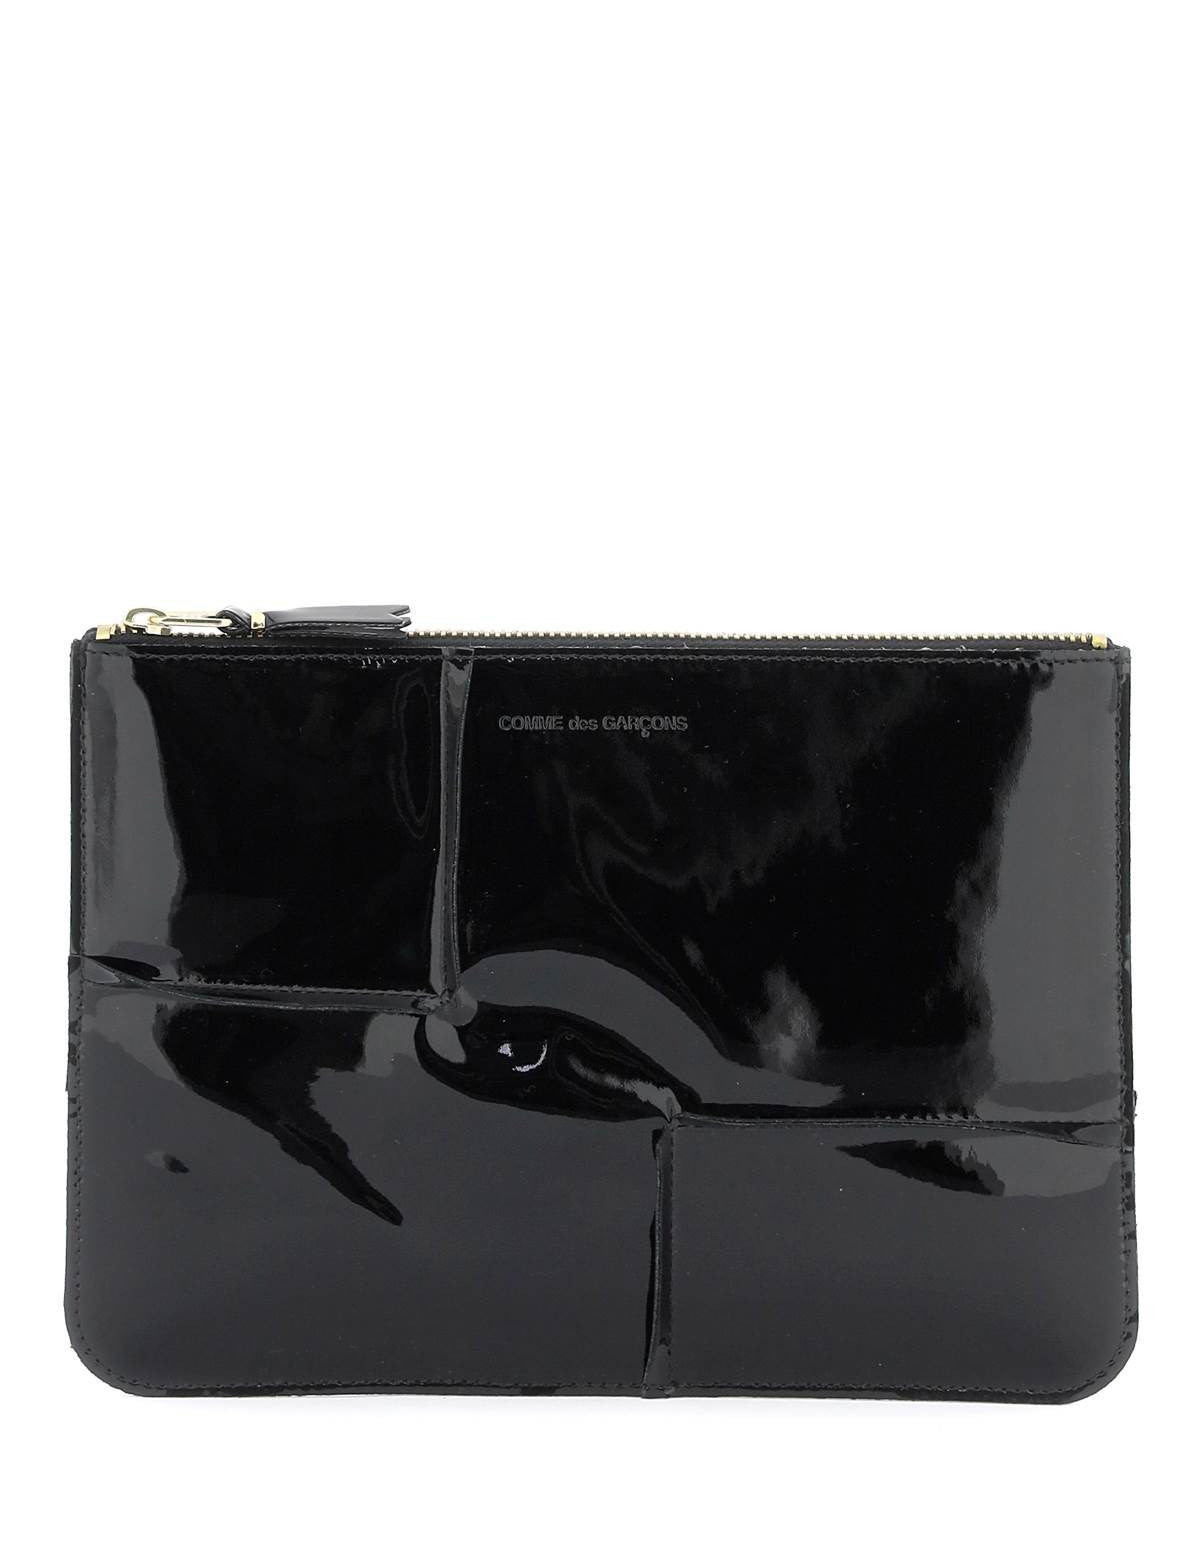 comme-des-garcons-wallet-glossy-patent-leather_ff88c03b-691d-462a-8ab3-e93be2935cb0.jpg